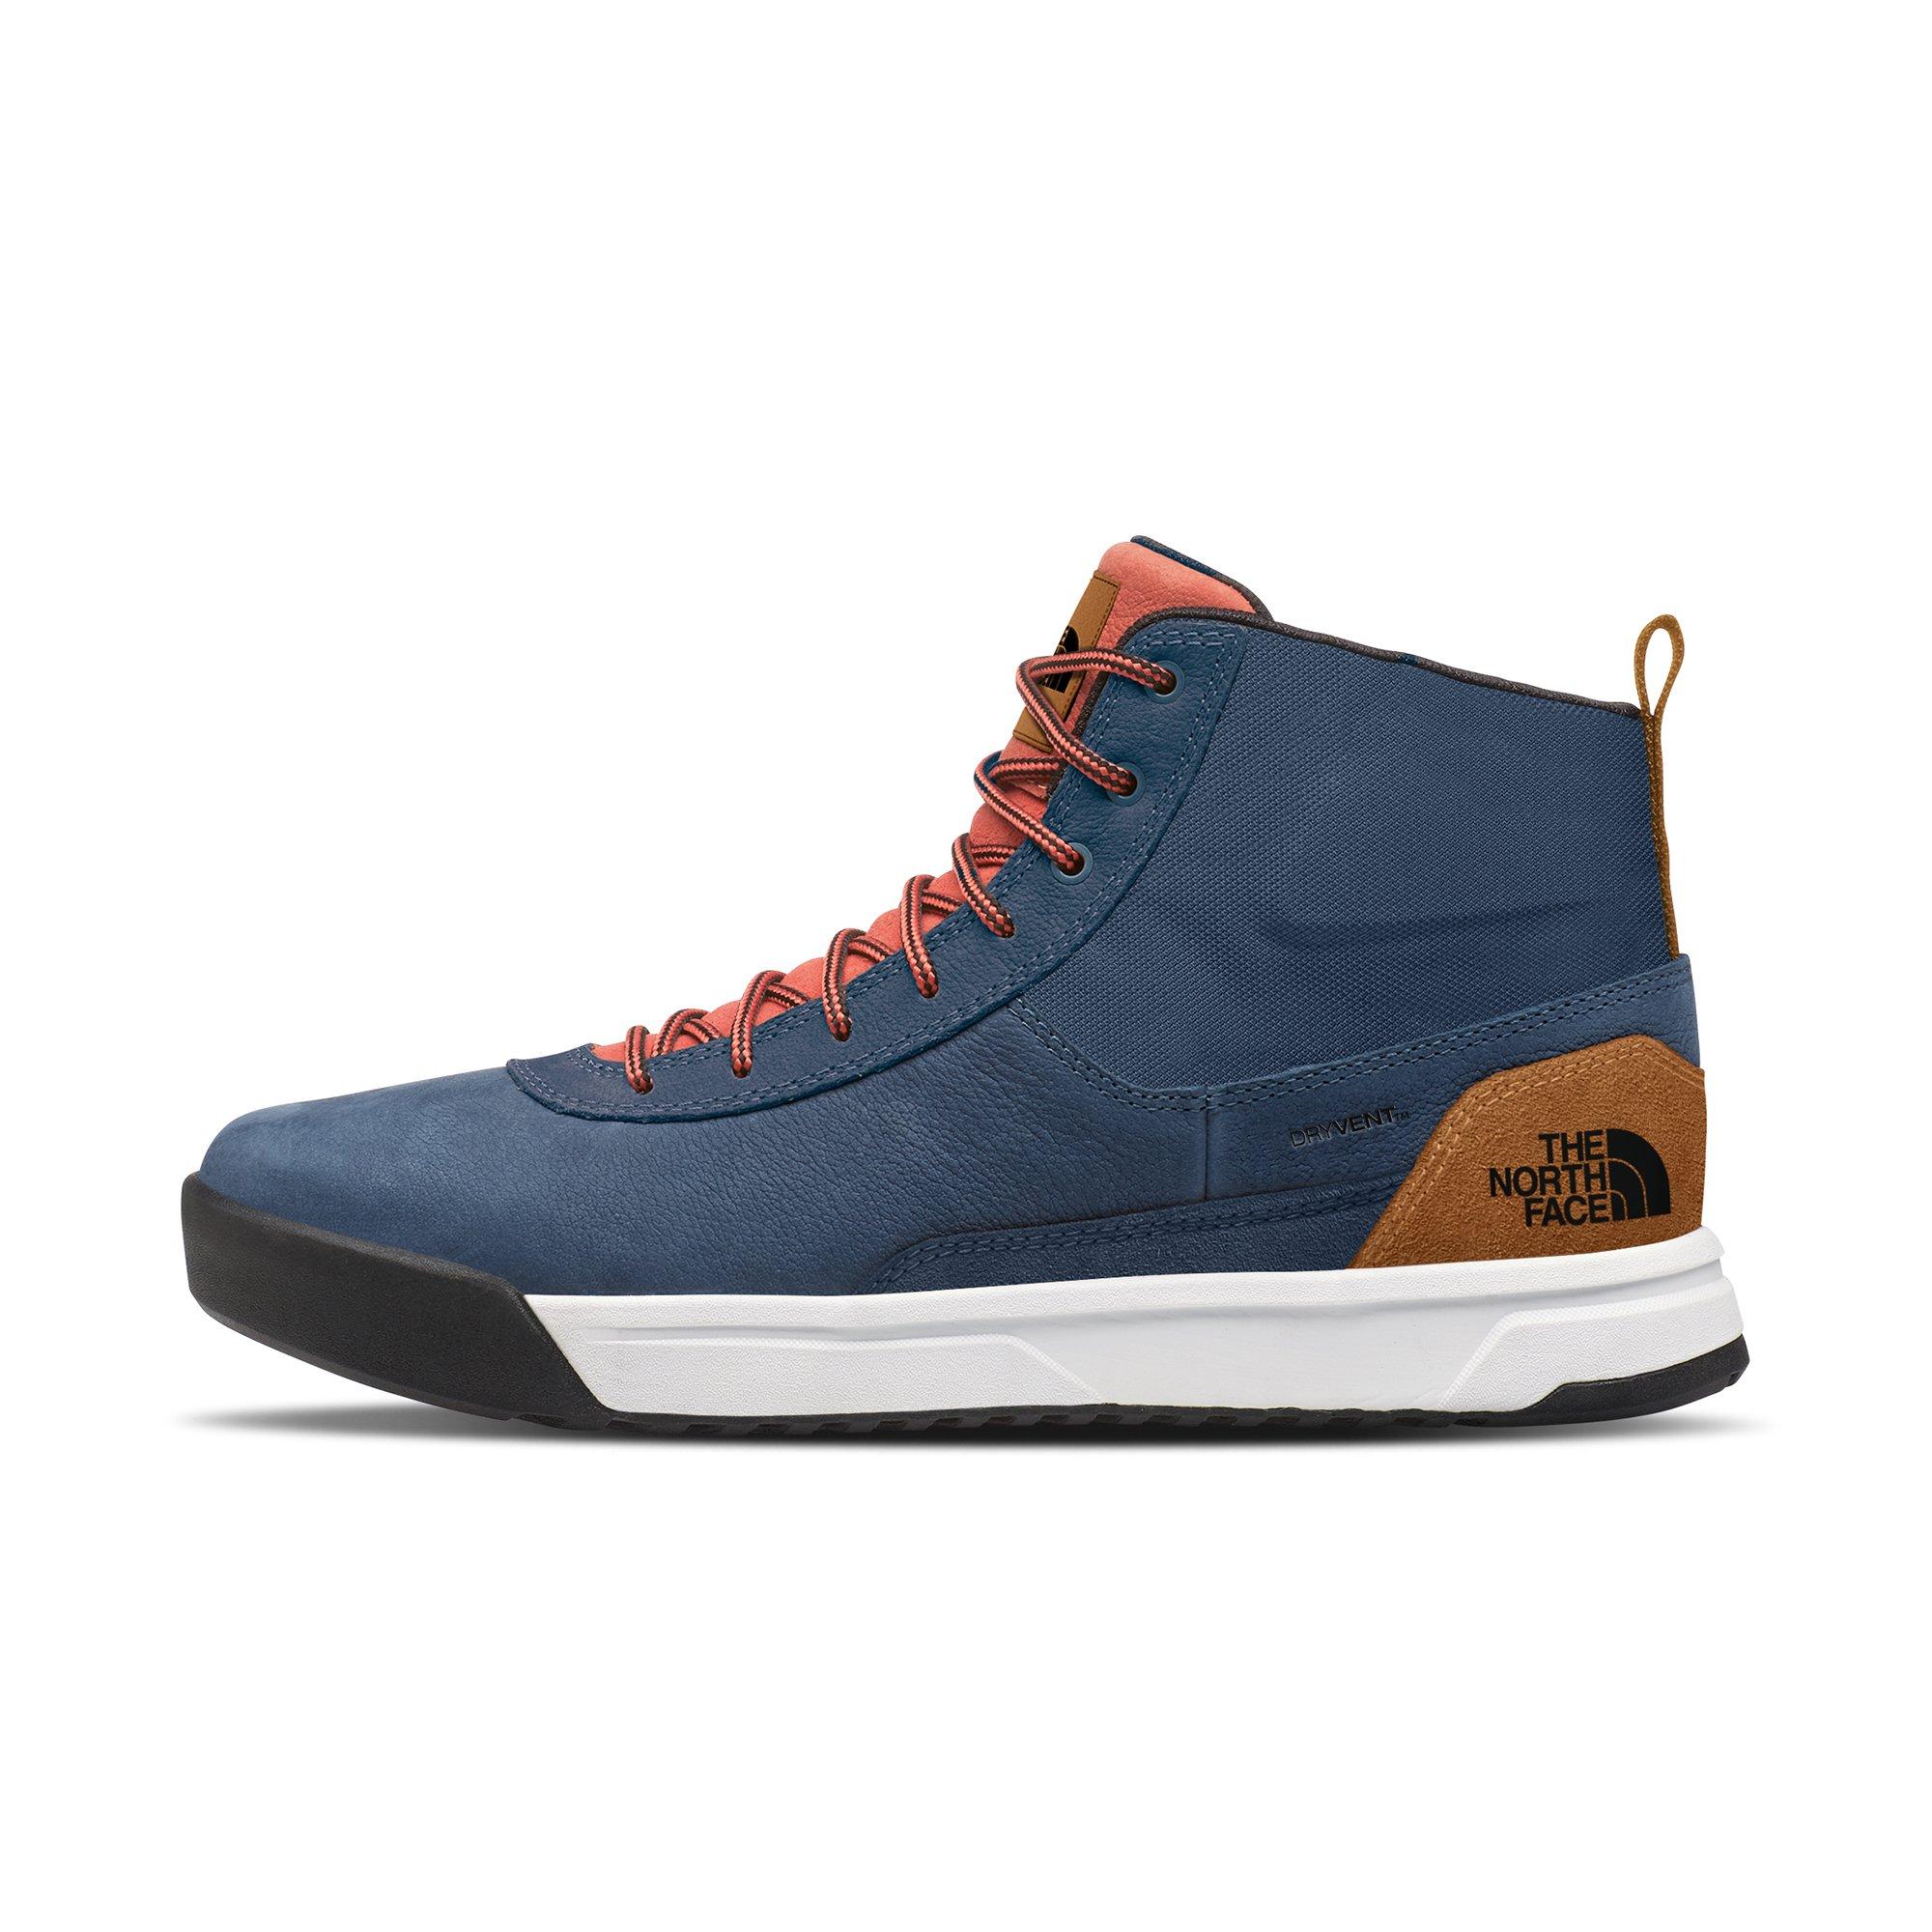 The North Face Larimer Mid Waterproof 